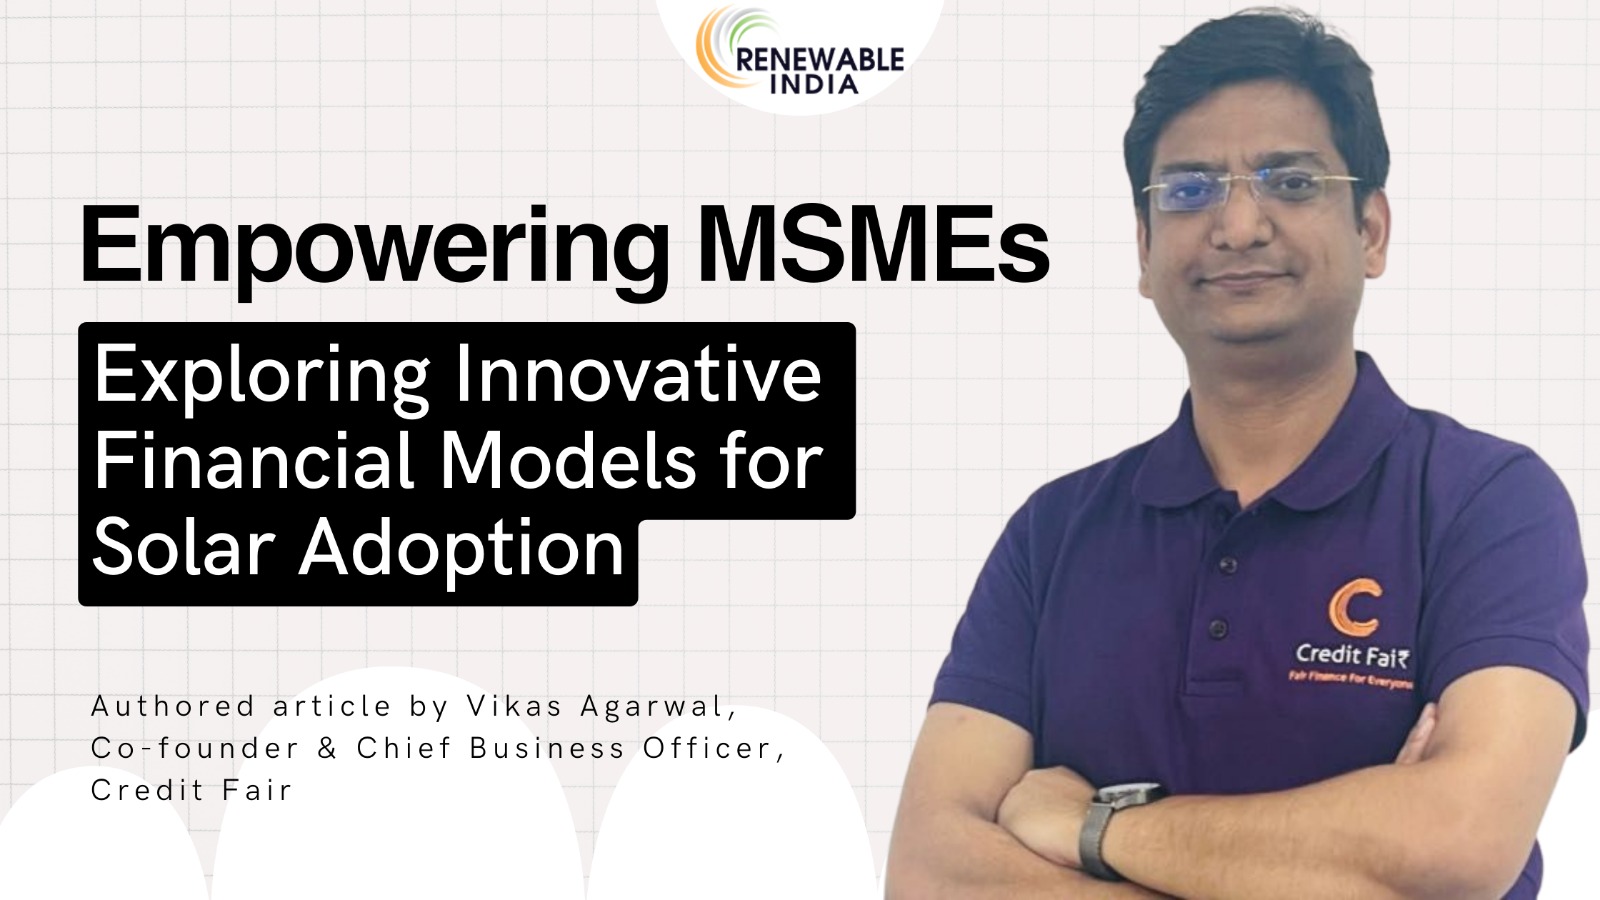 Need new financial models to accelerate solar drive in MSME sector